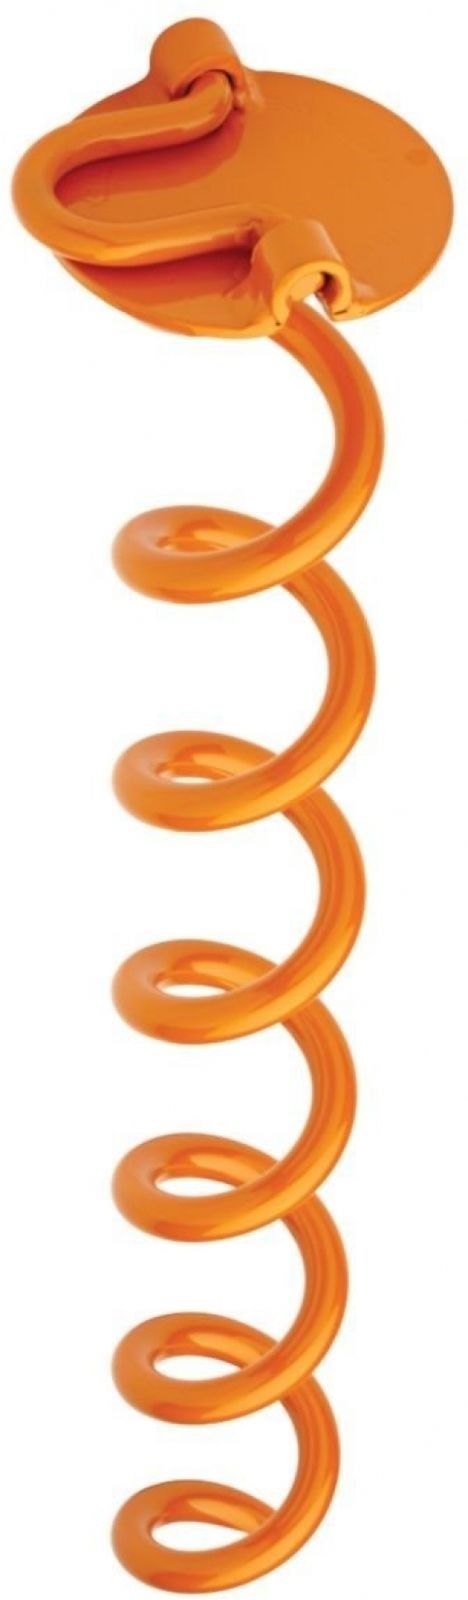 Liberty Outdoor ANCFR16-ORG-A Folding Ring Spiral Ground Anchor, Orange, 16-Inch